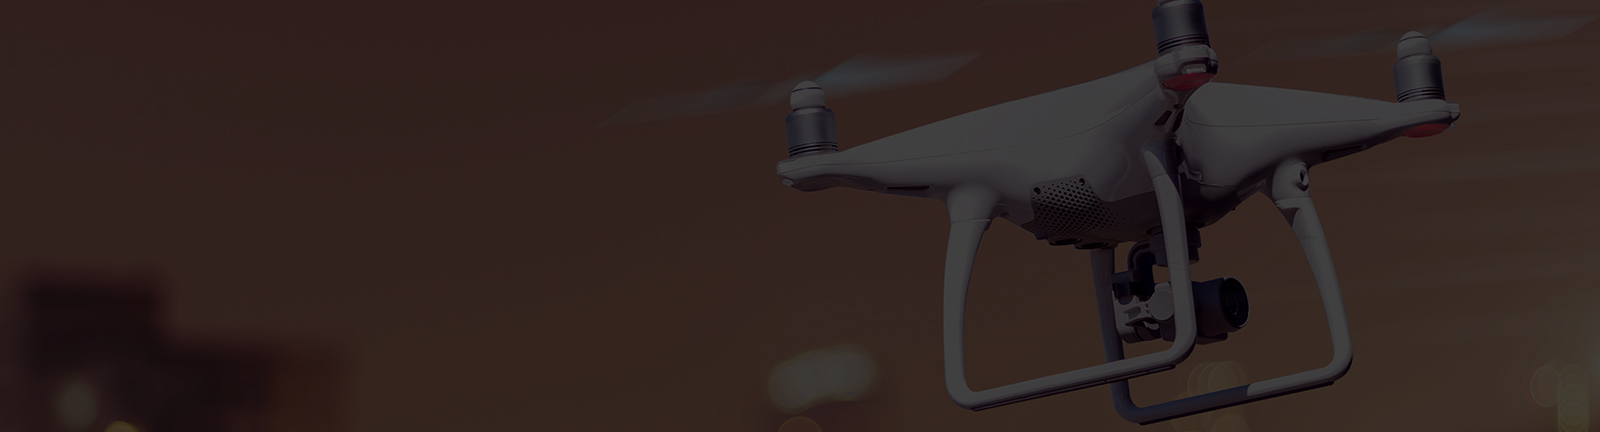 Drone industry – trends and outlook